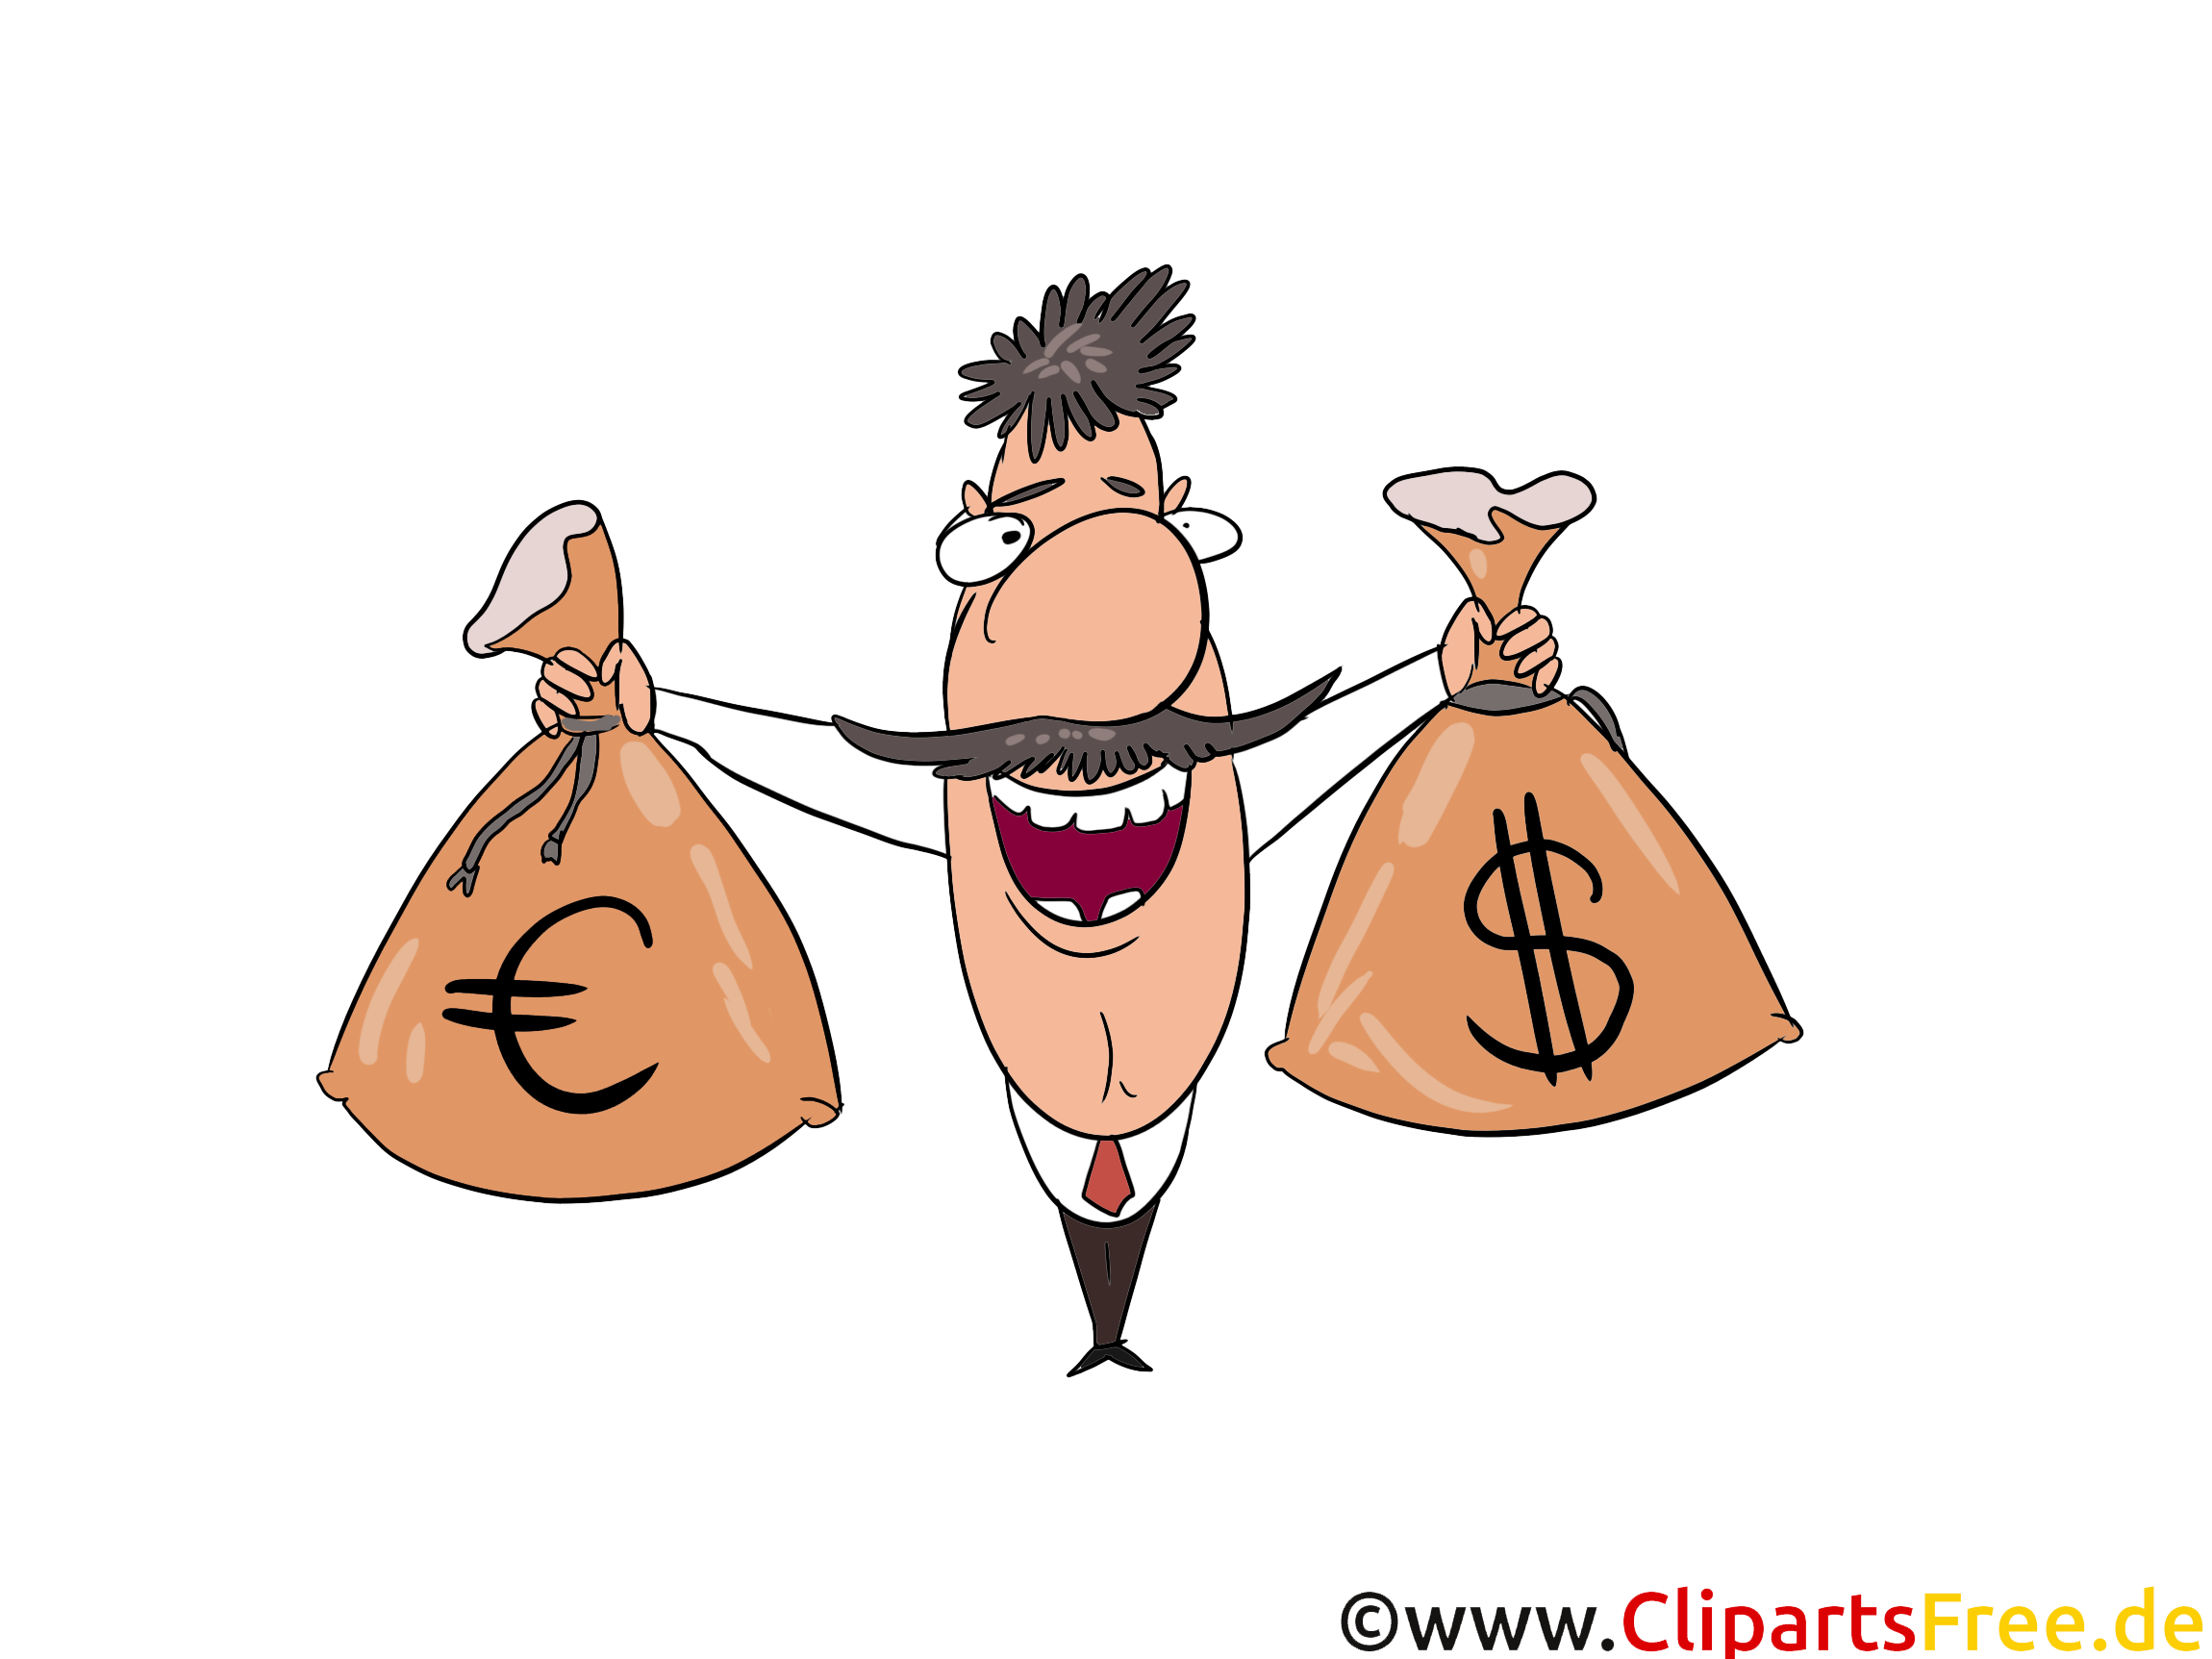 clipart of euro - photo #26